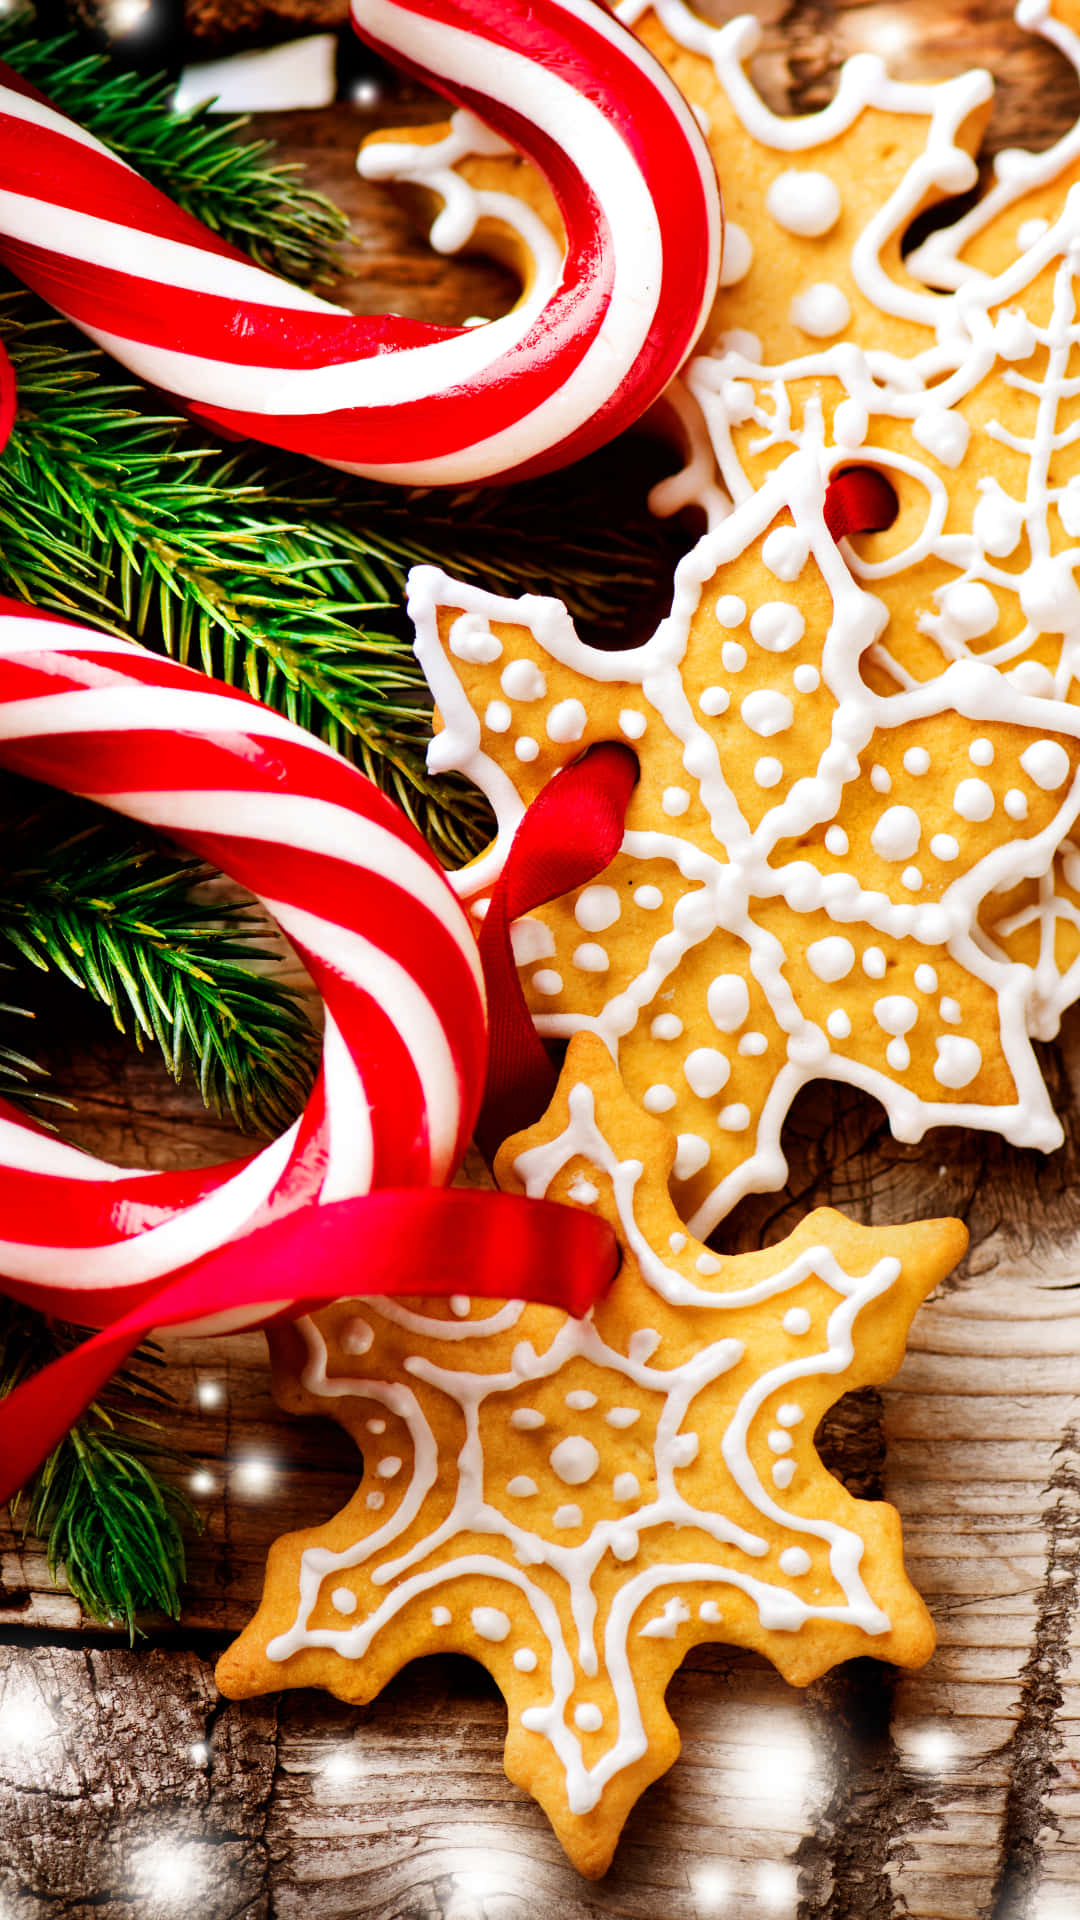 Christmas Cookiesand Candy Canes Wallpaper